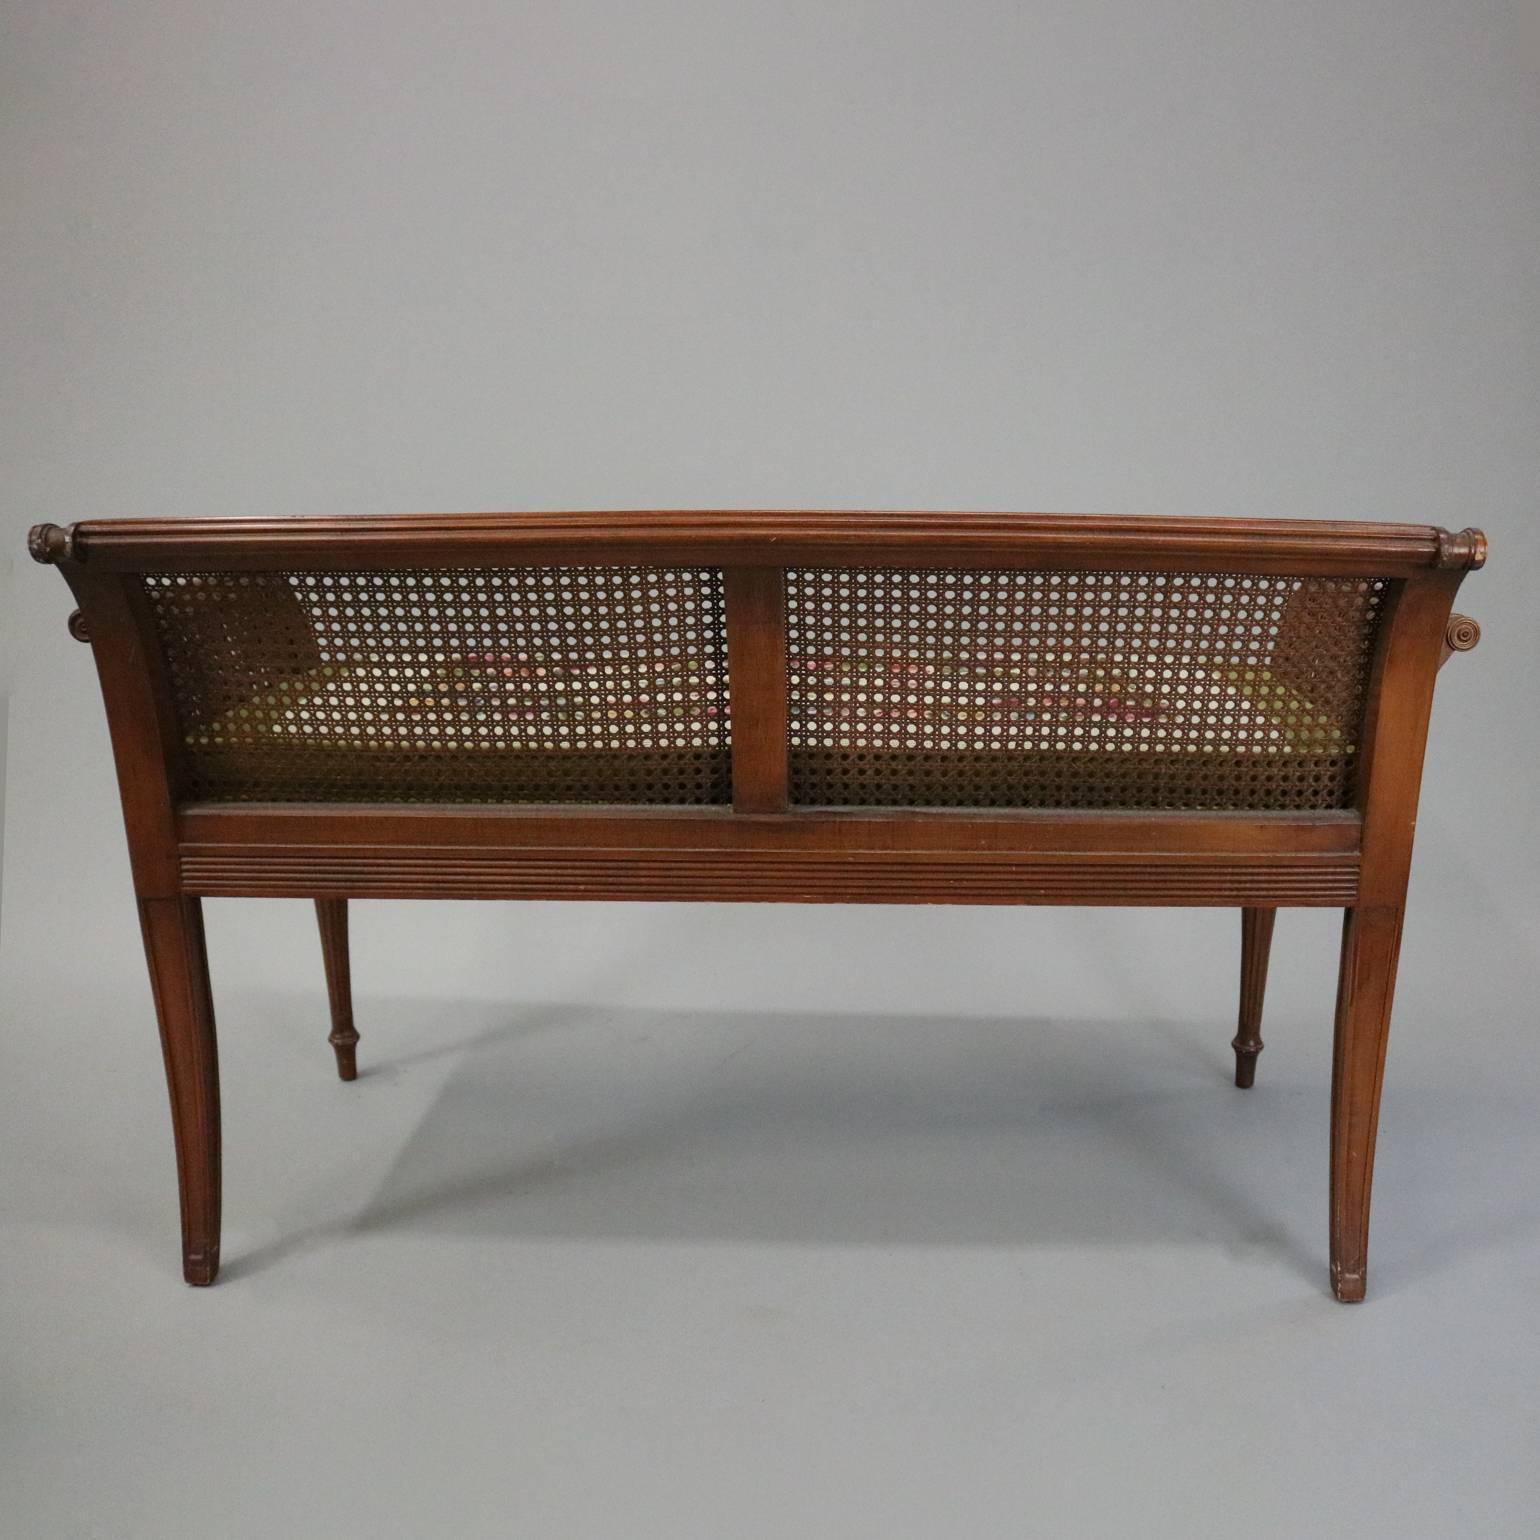 European Antique French Classical Carved Mahogany Caned Bench, circa 1840